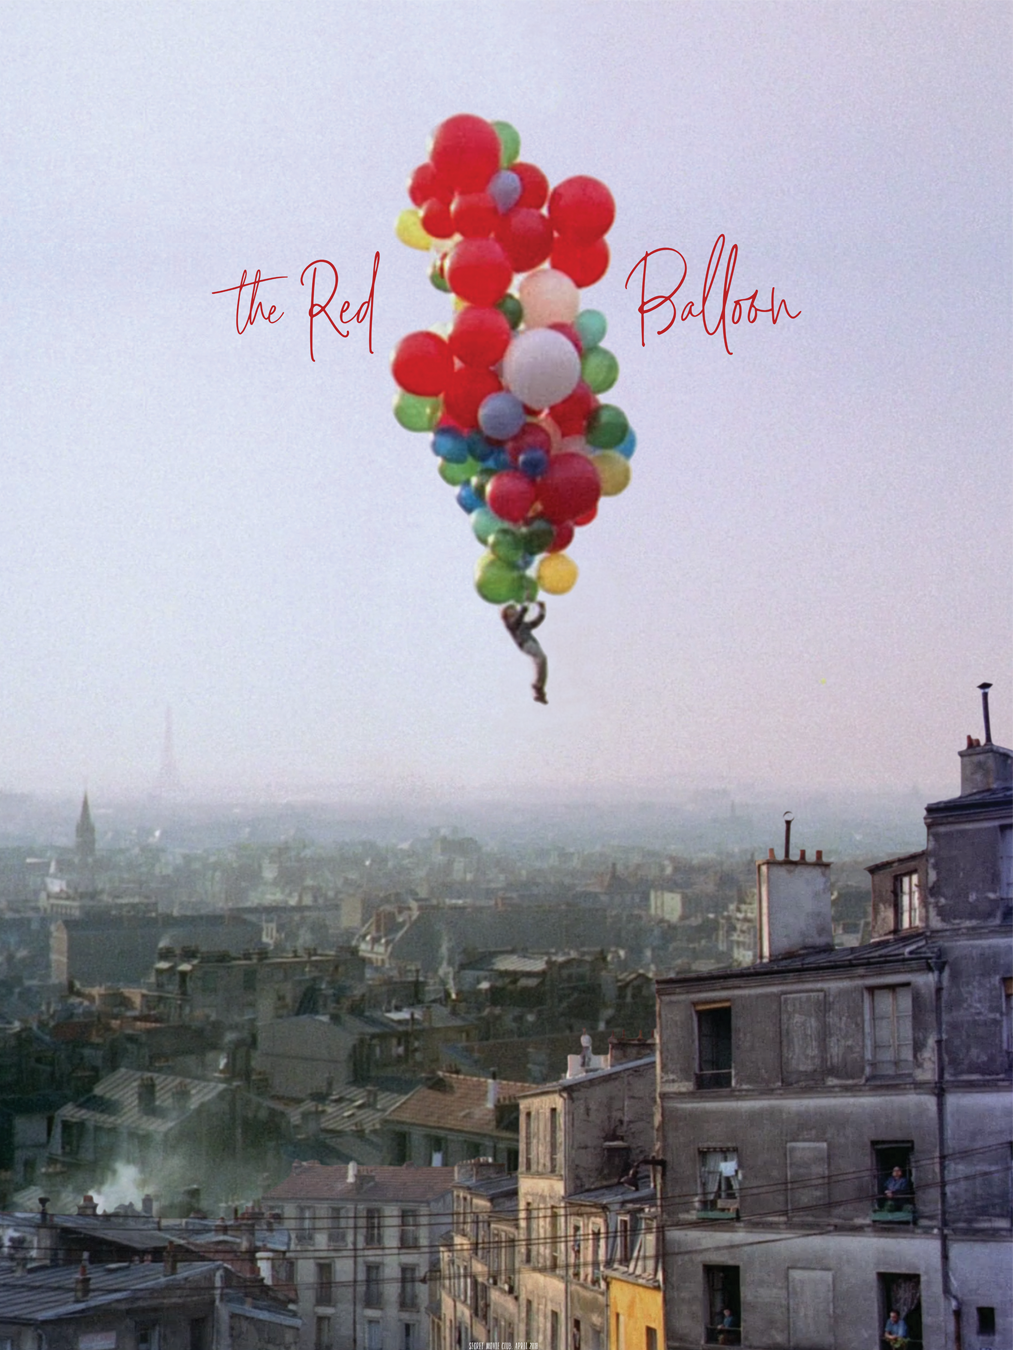 An image of The Red Ballon